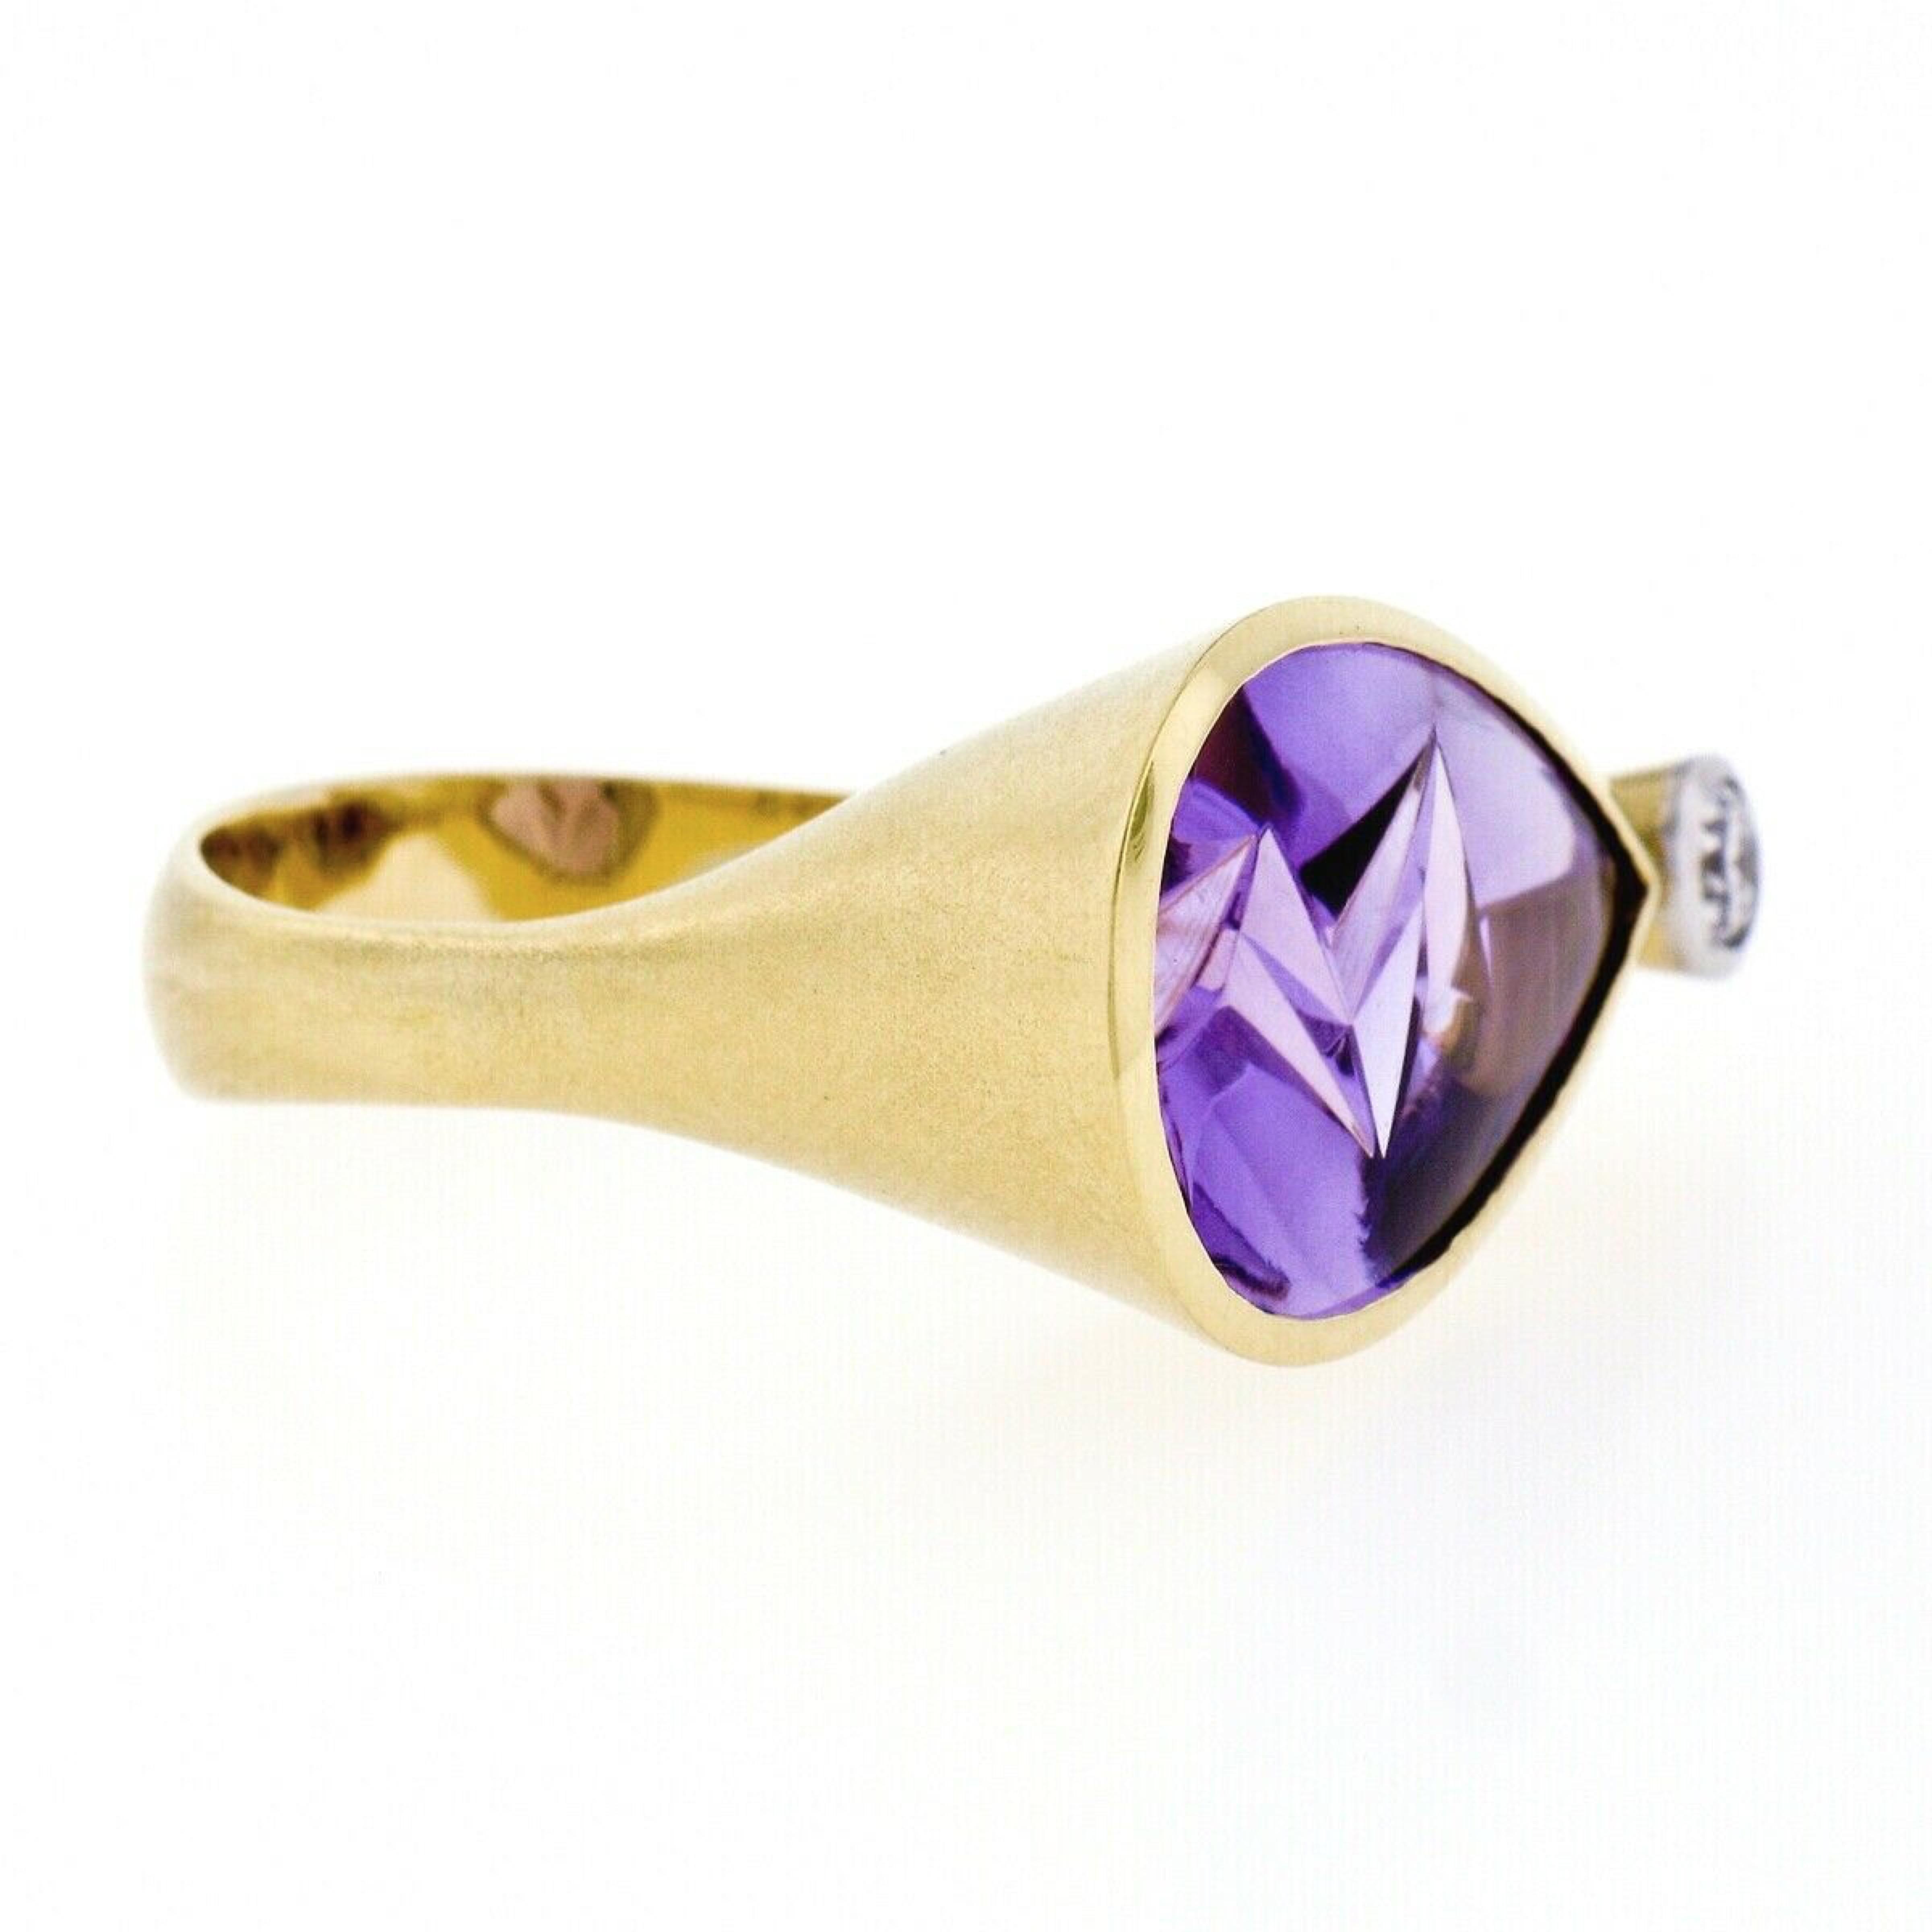 18k Yellow Gold Atelier Munsteiner Icicle Cut Amethyst Diamond Ring w/ Papers 2